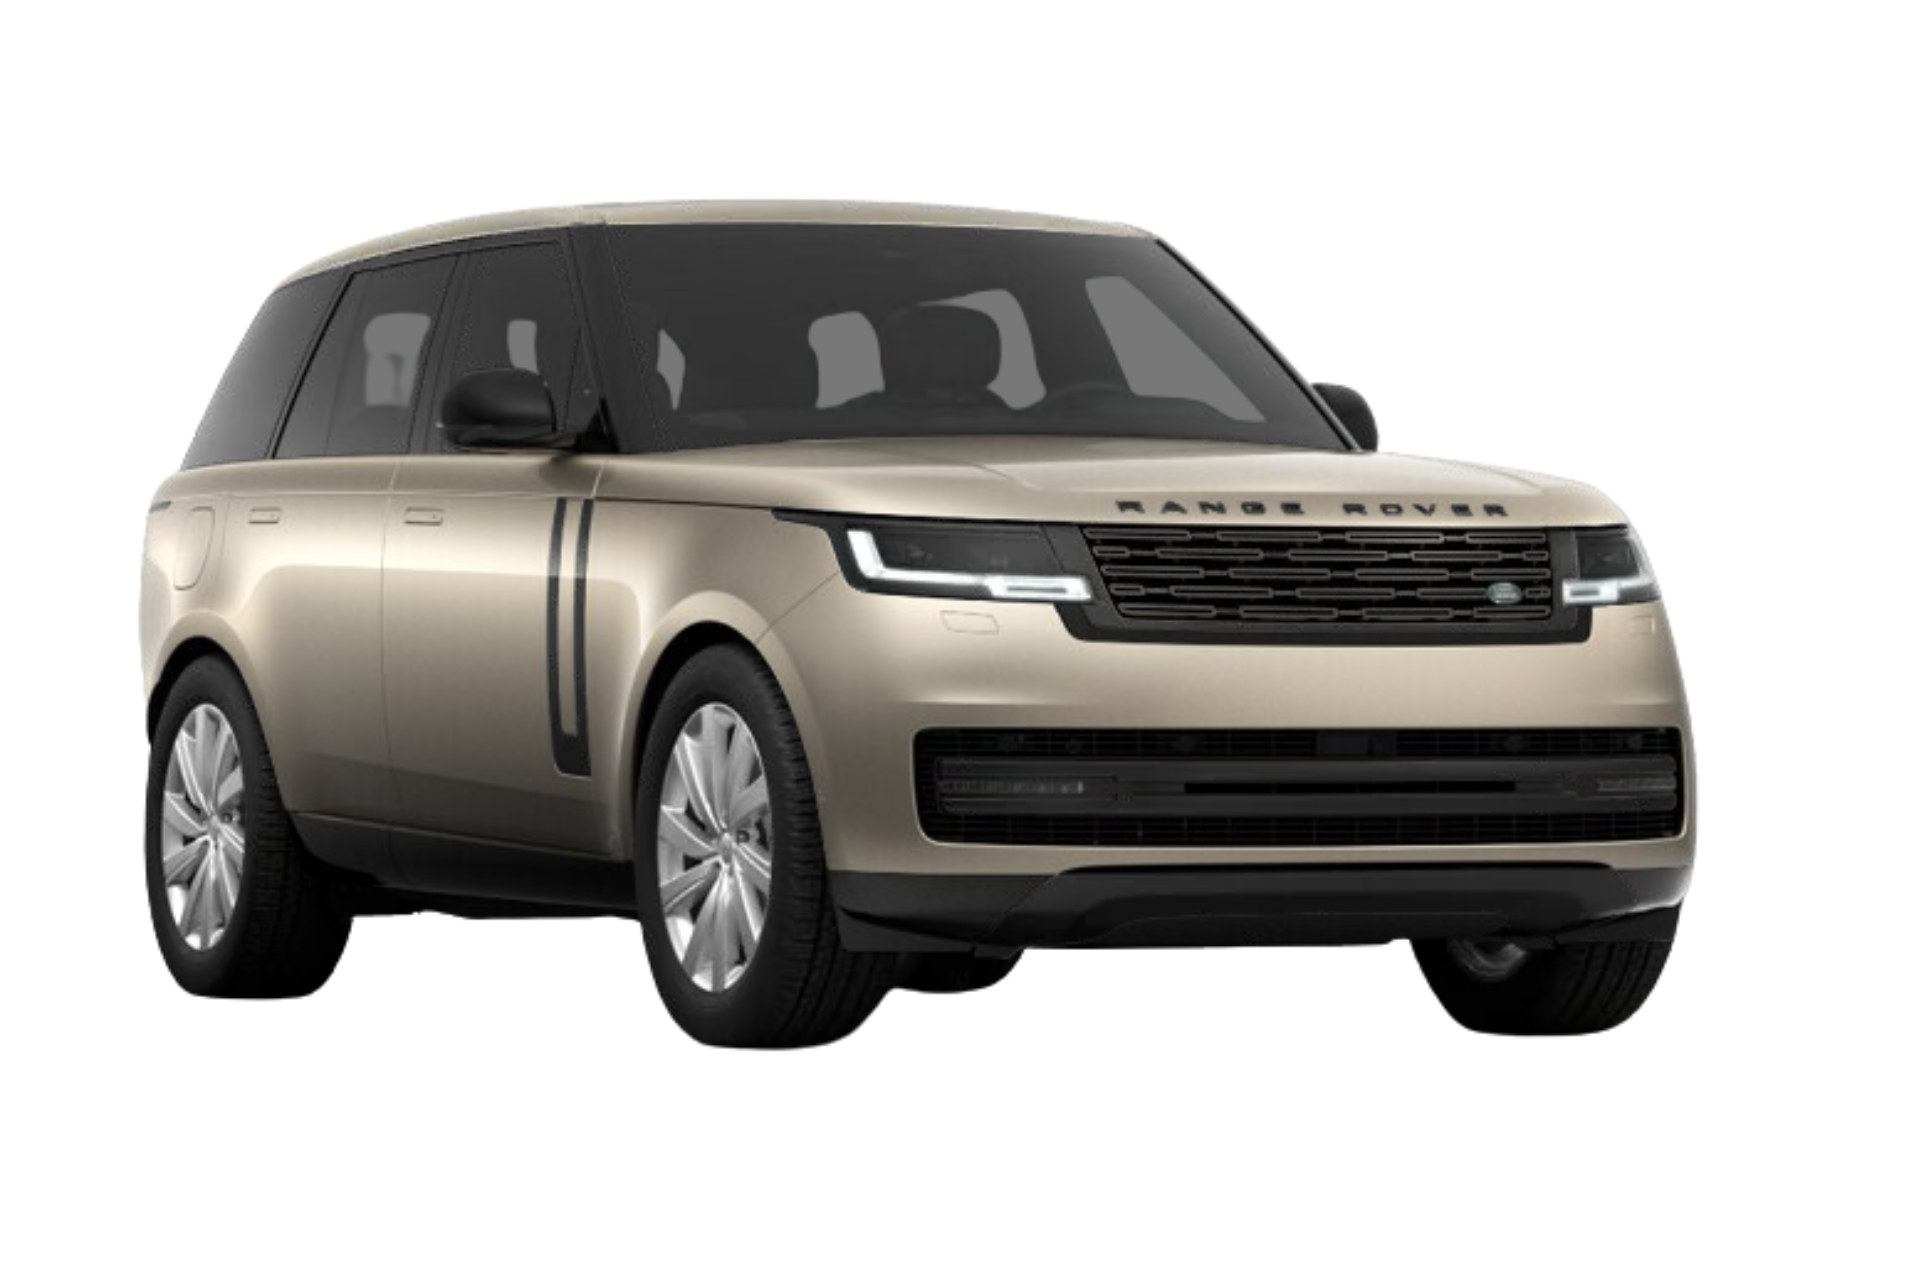 Land Rover Range Rover charging station